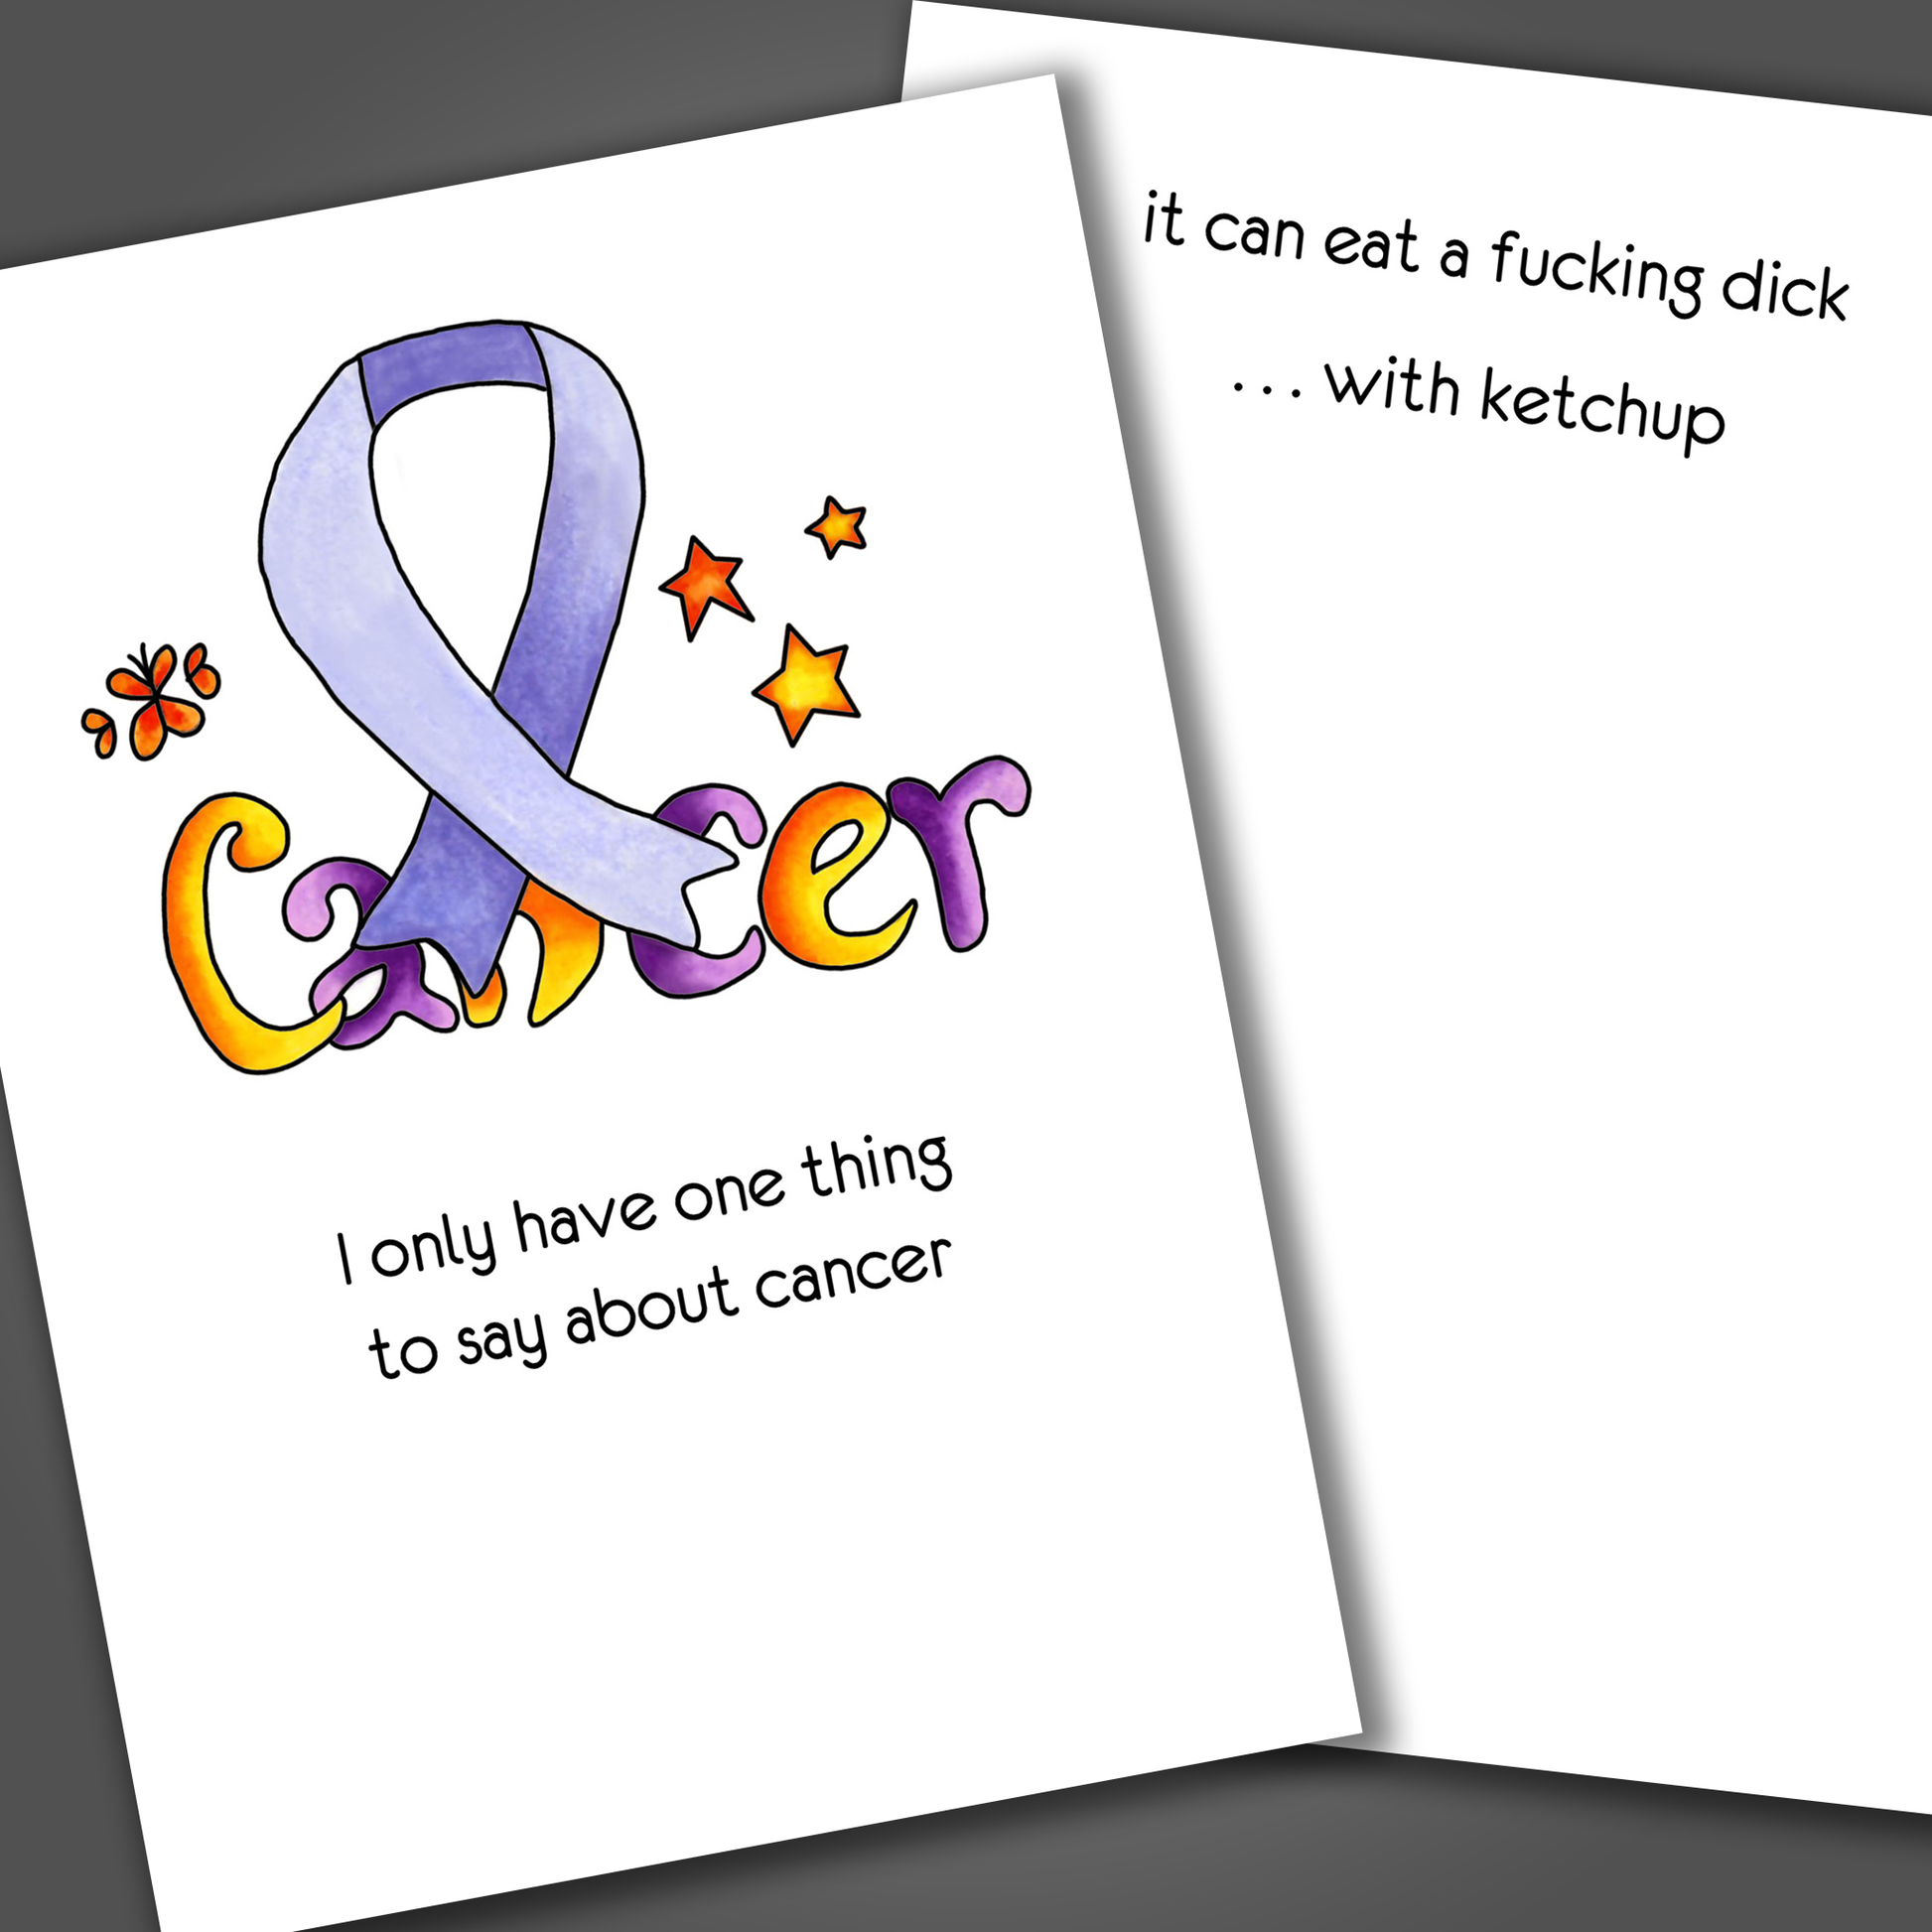 Funny cancer treatment card with a purple ribbon and the word cancer drawn on the front of the card. Inside the card is a funny joke that ends with cancer can eat a fucking dick ...with ketchup.